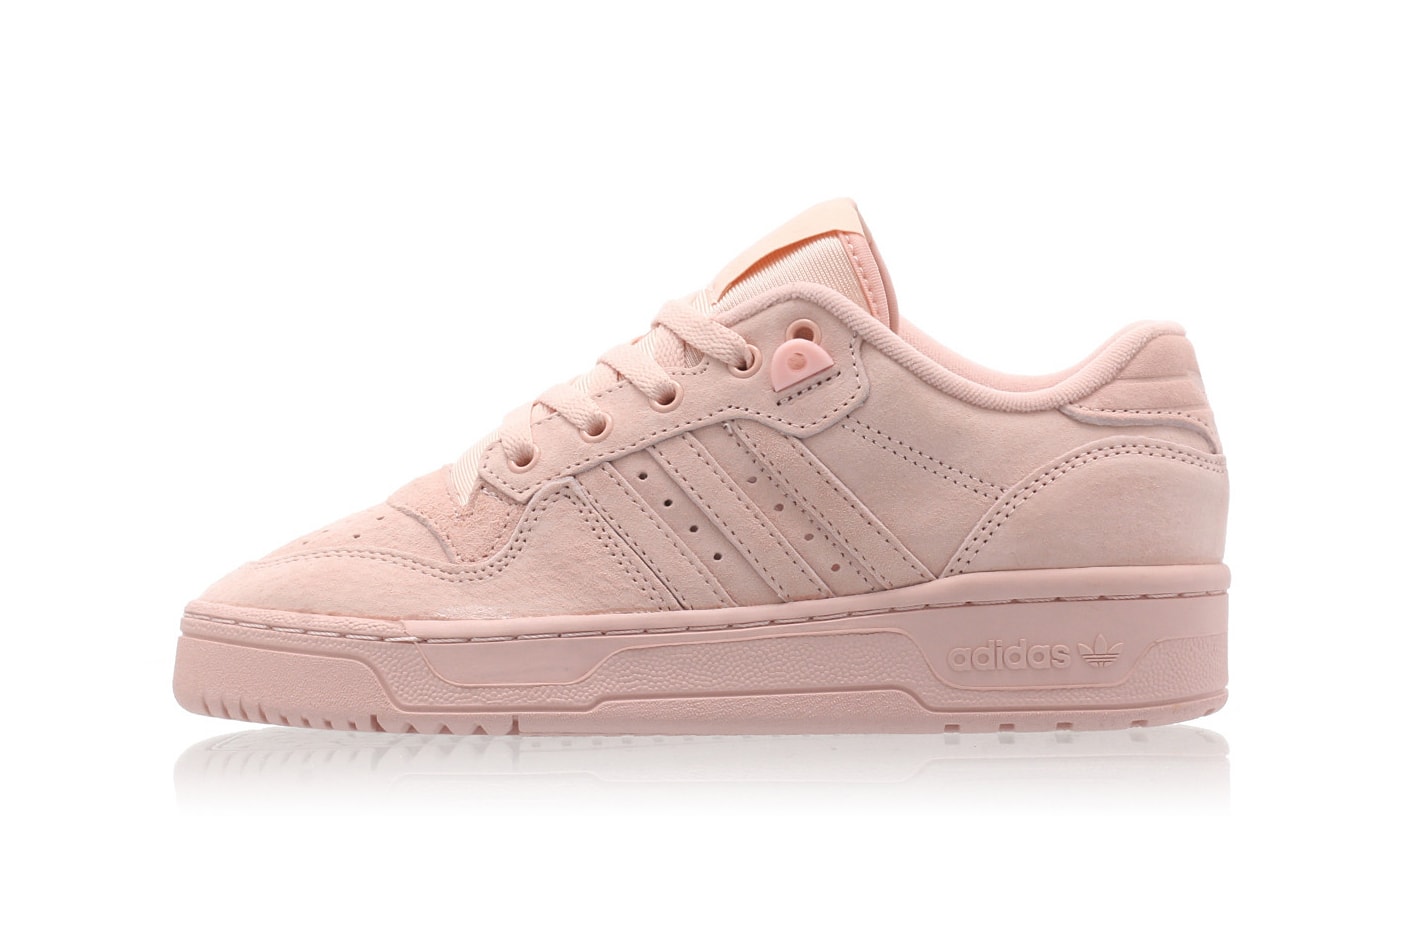 adidas Originals Rivalry Low Coral Vapour Pink Sneakers Trainers Women's 